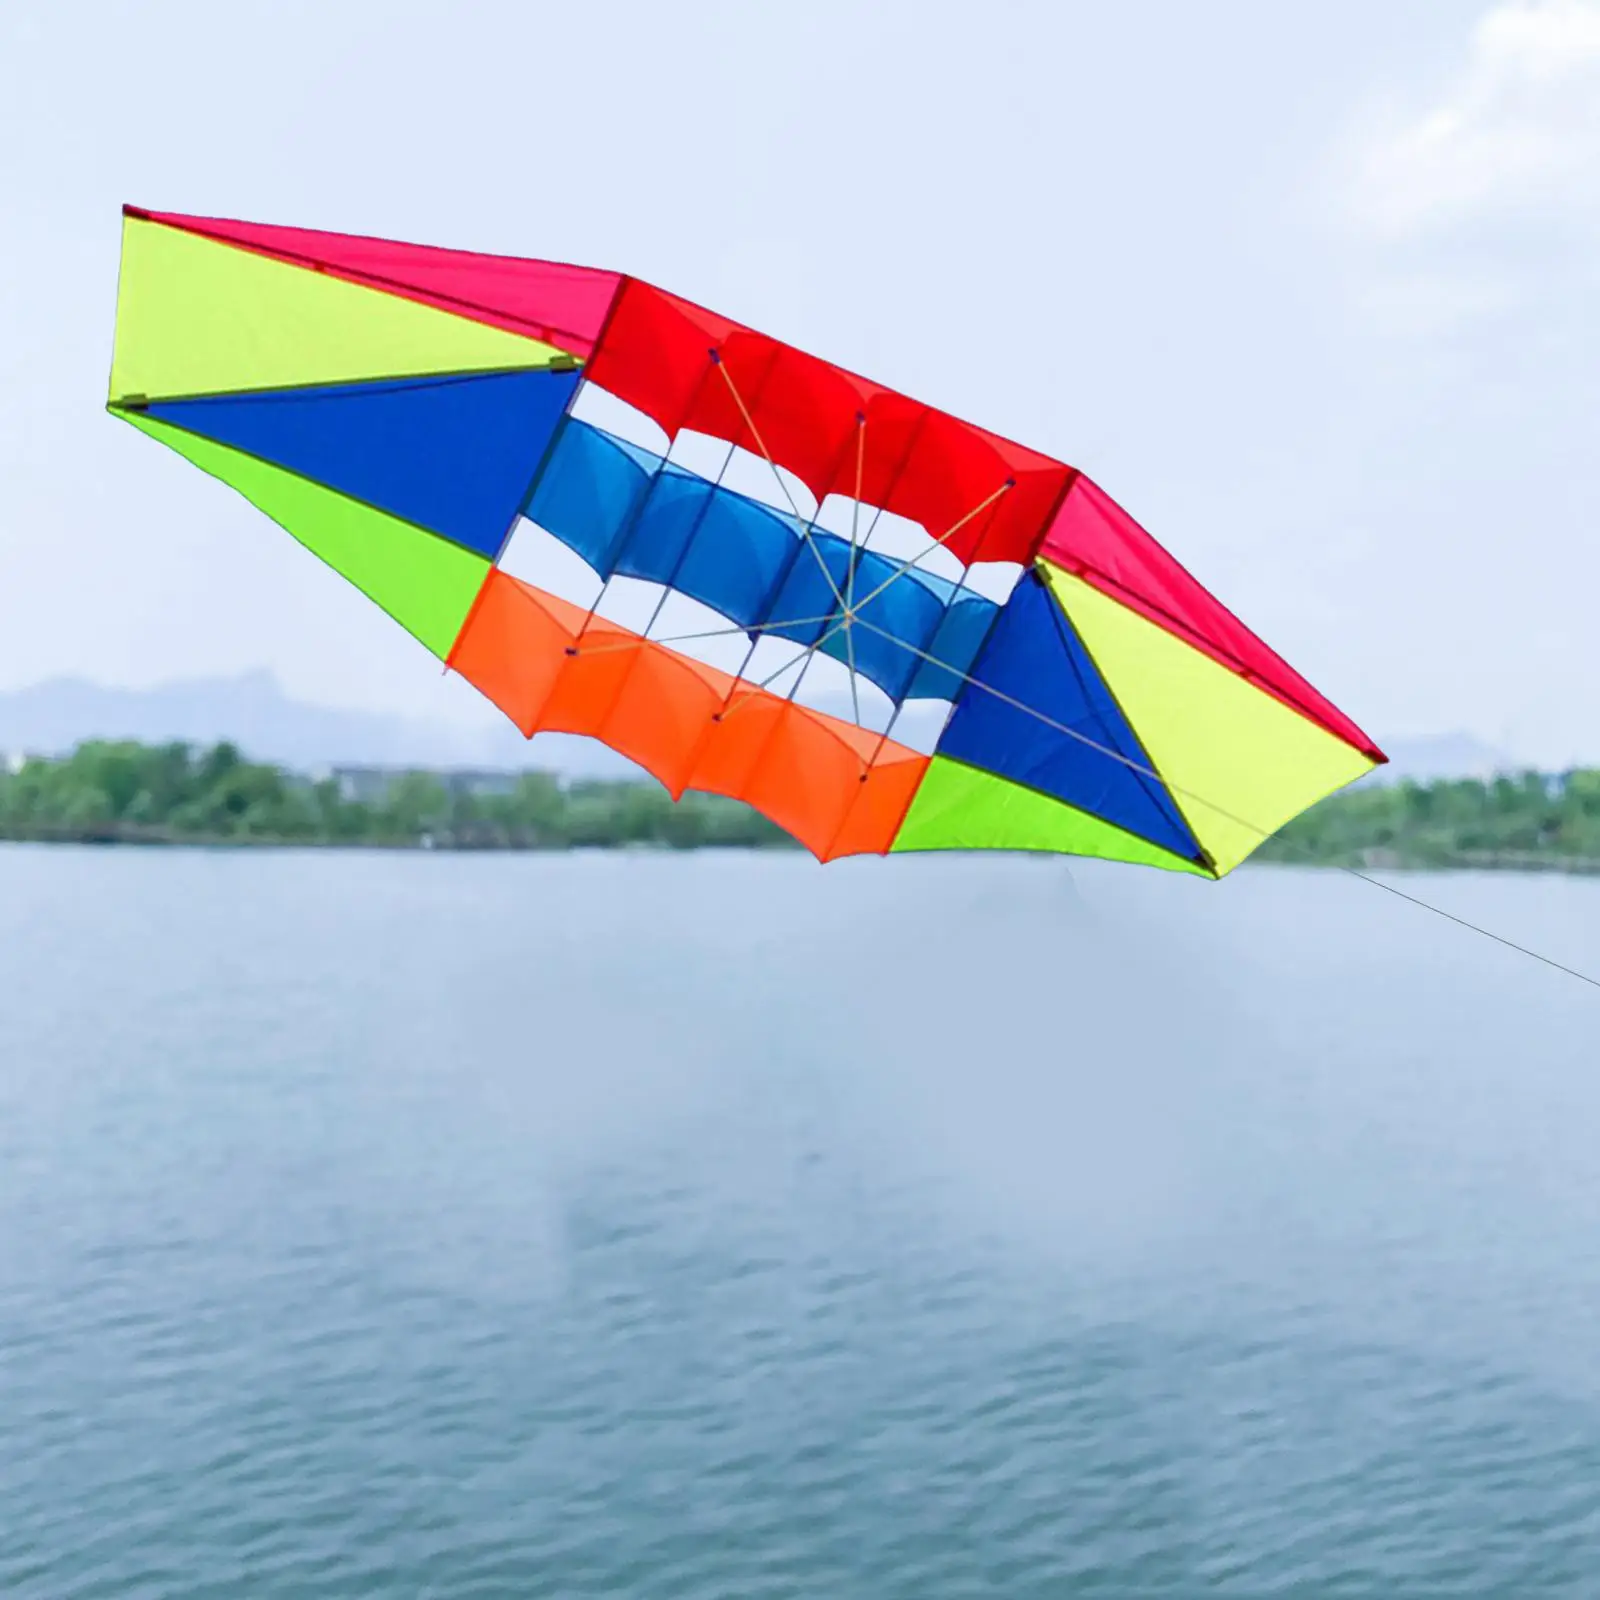 Large Colorful  Toy Outdoor Sports Game Easy to Fly Parachute  Single Line s for Children Kids Adults